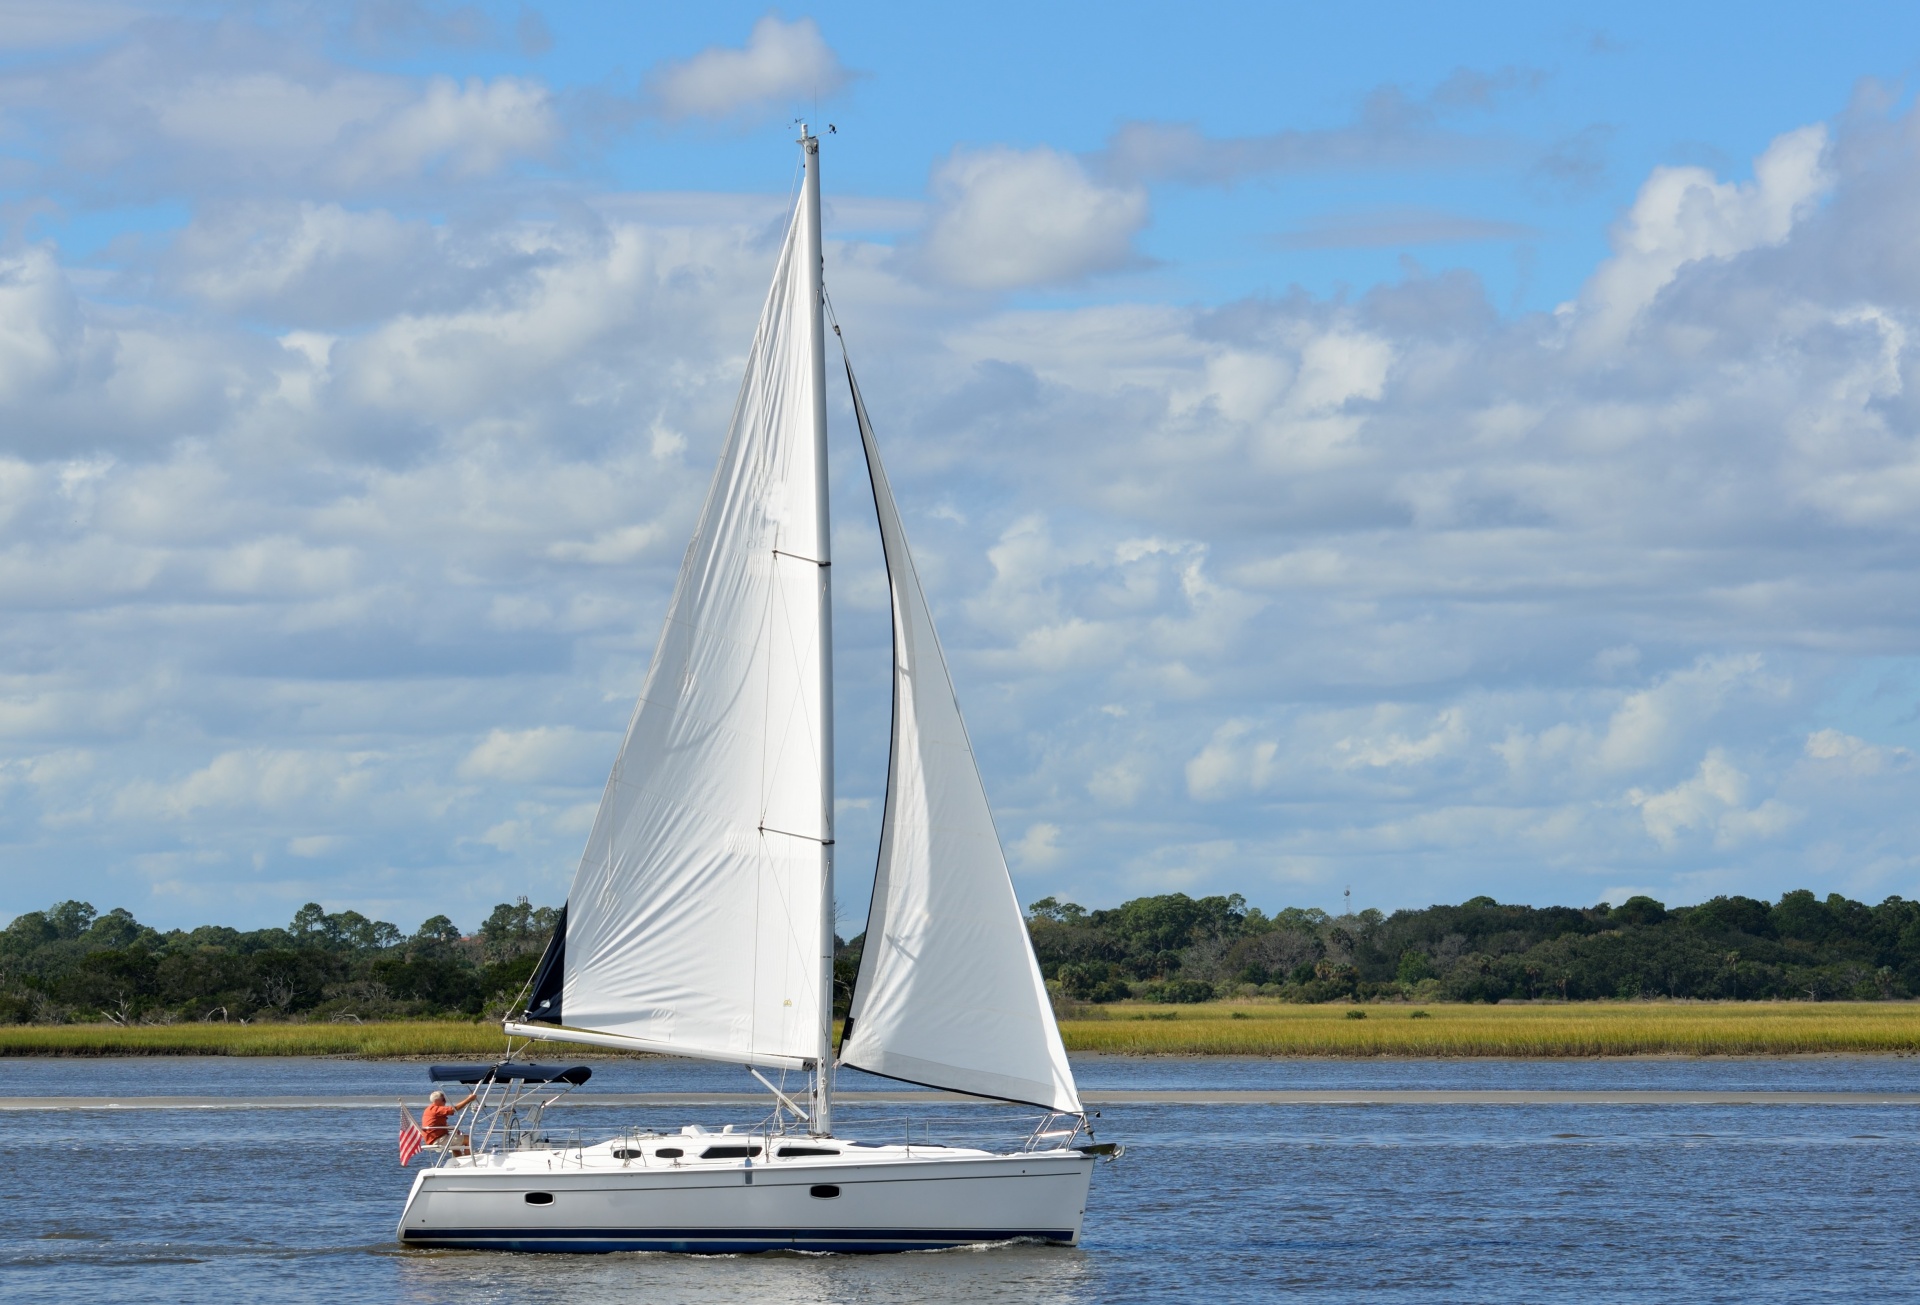 Sailing On The River